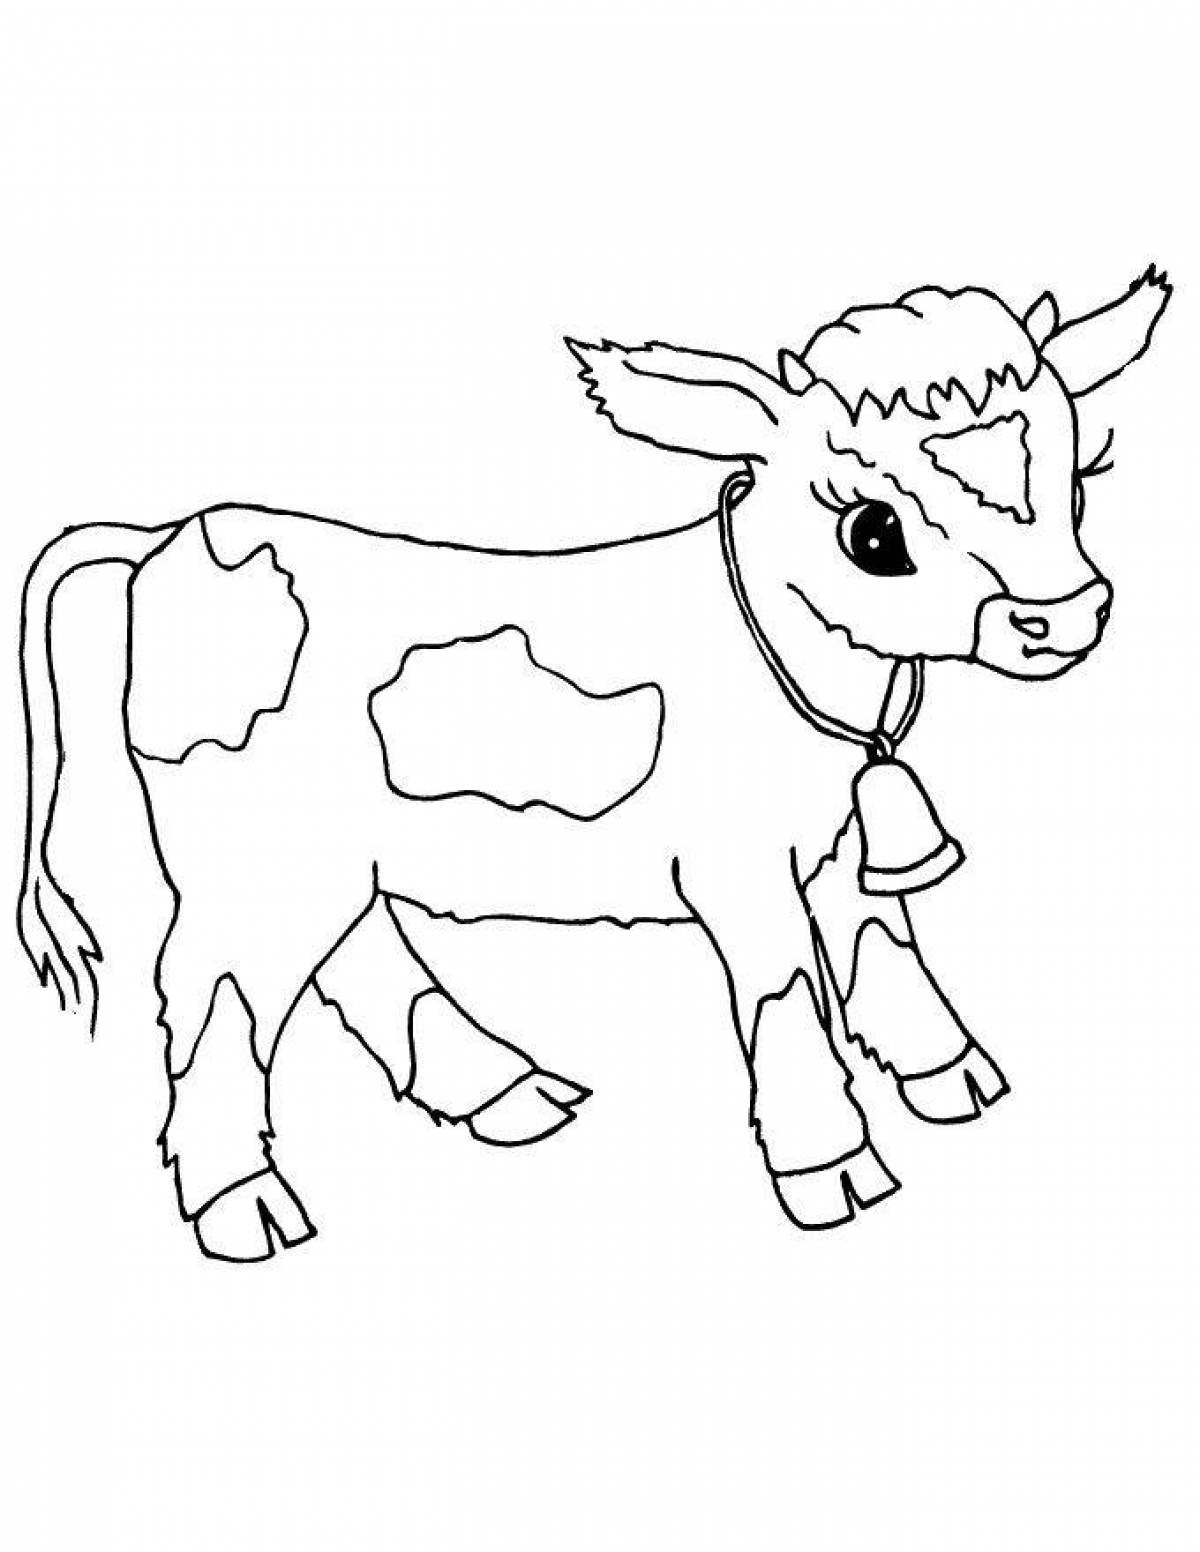 Coloring page amazing siyr